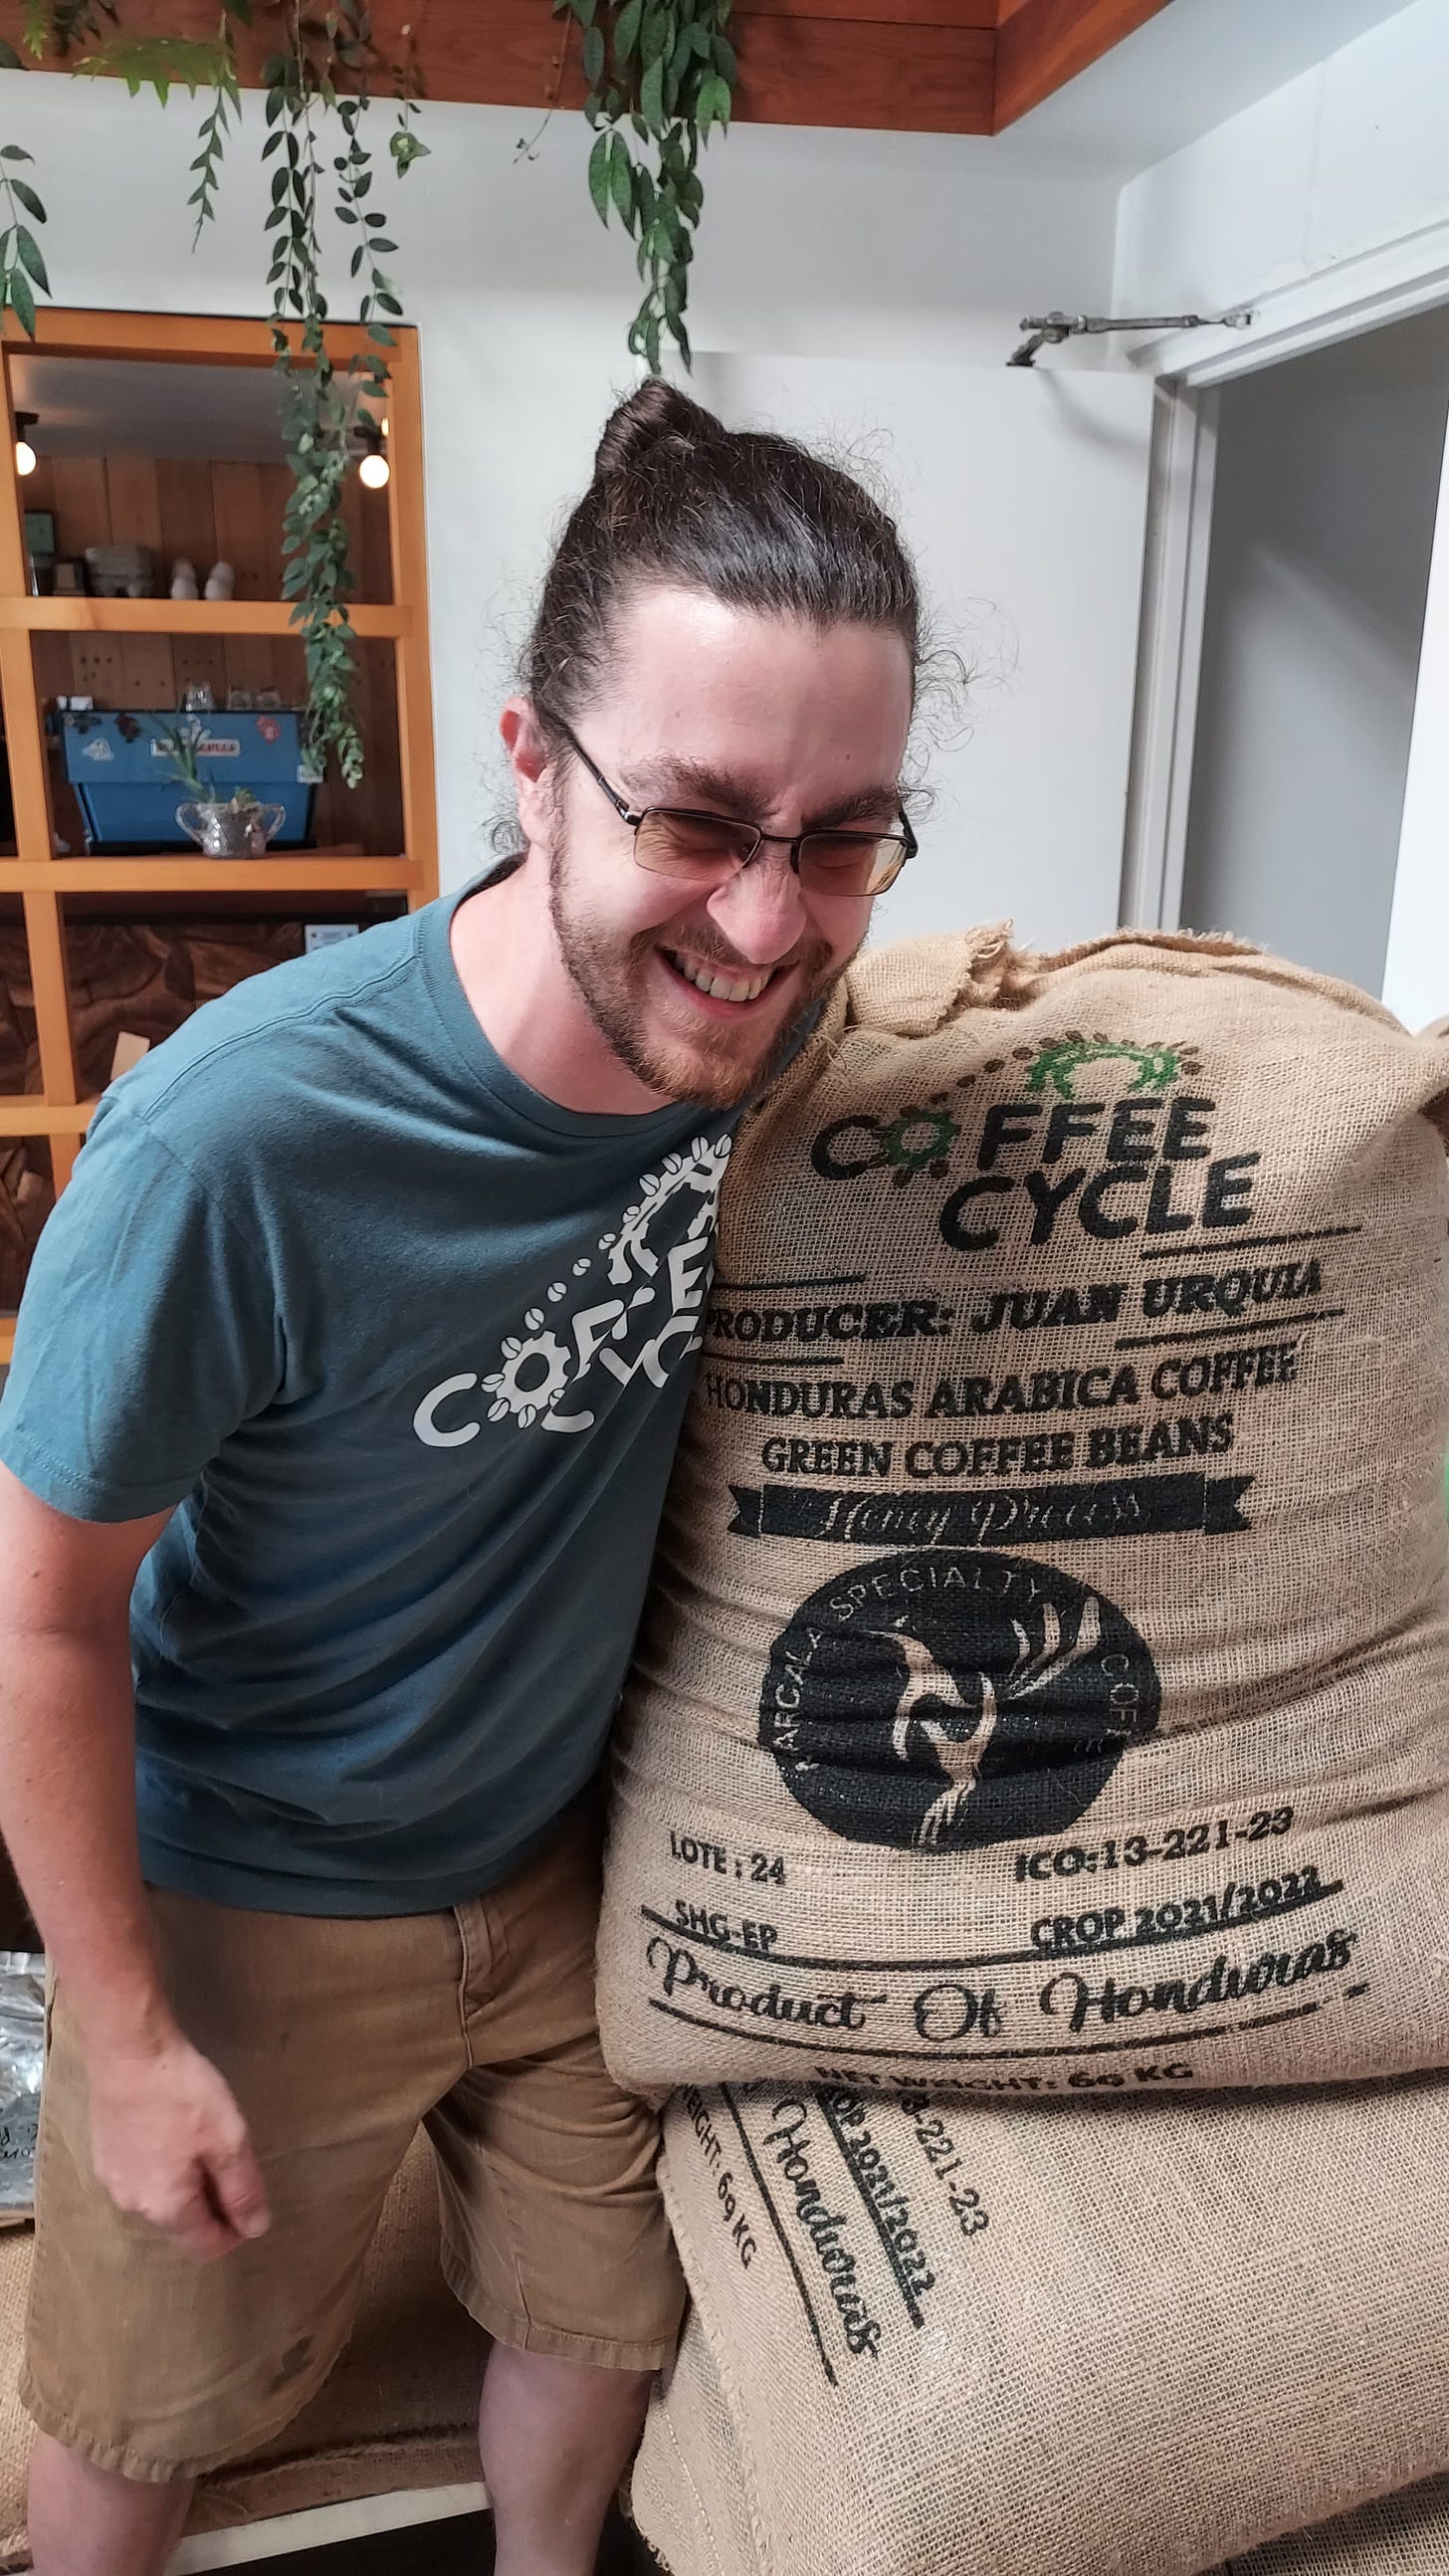 A tall white man with a scruffy beard, hair pulled back, glasses, blue t-shirt has his arm around a burlap coffee sack and is doubled over with a big smile on his face